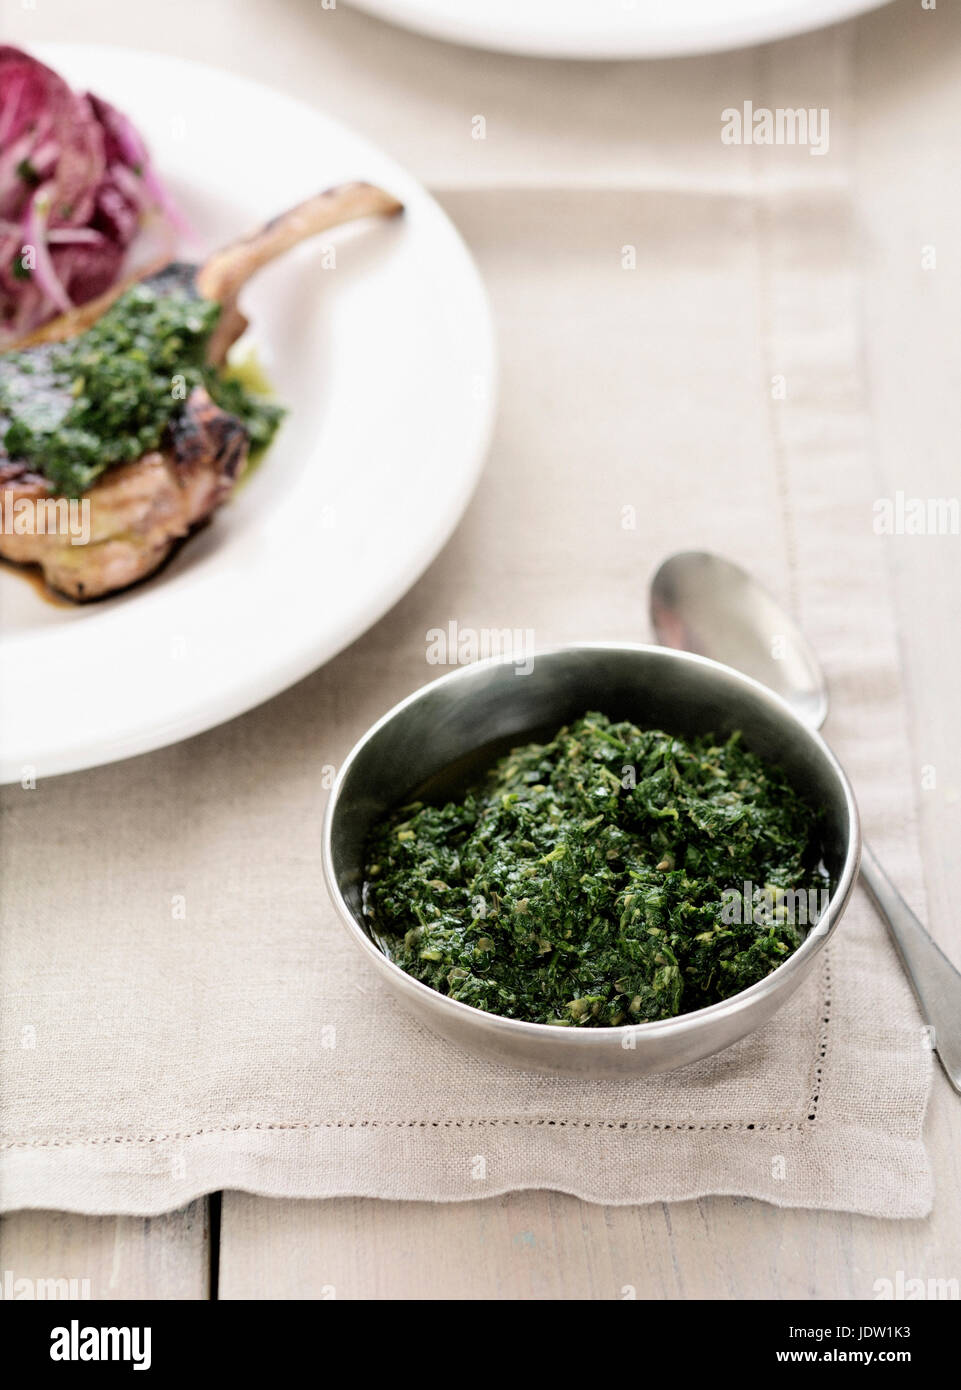 Bowl of cooked spinach Stock Photo